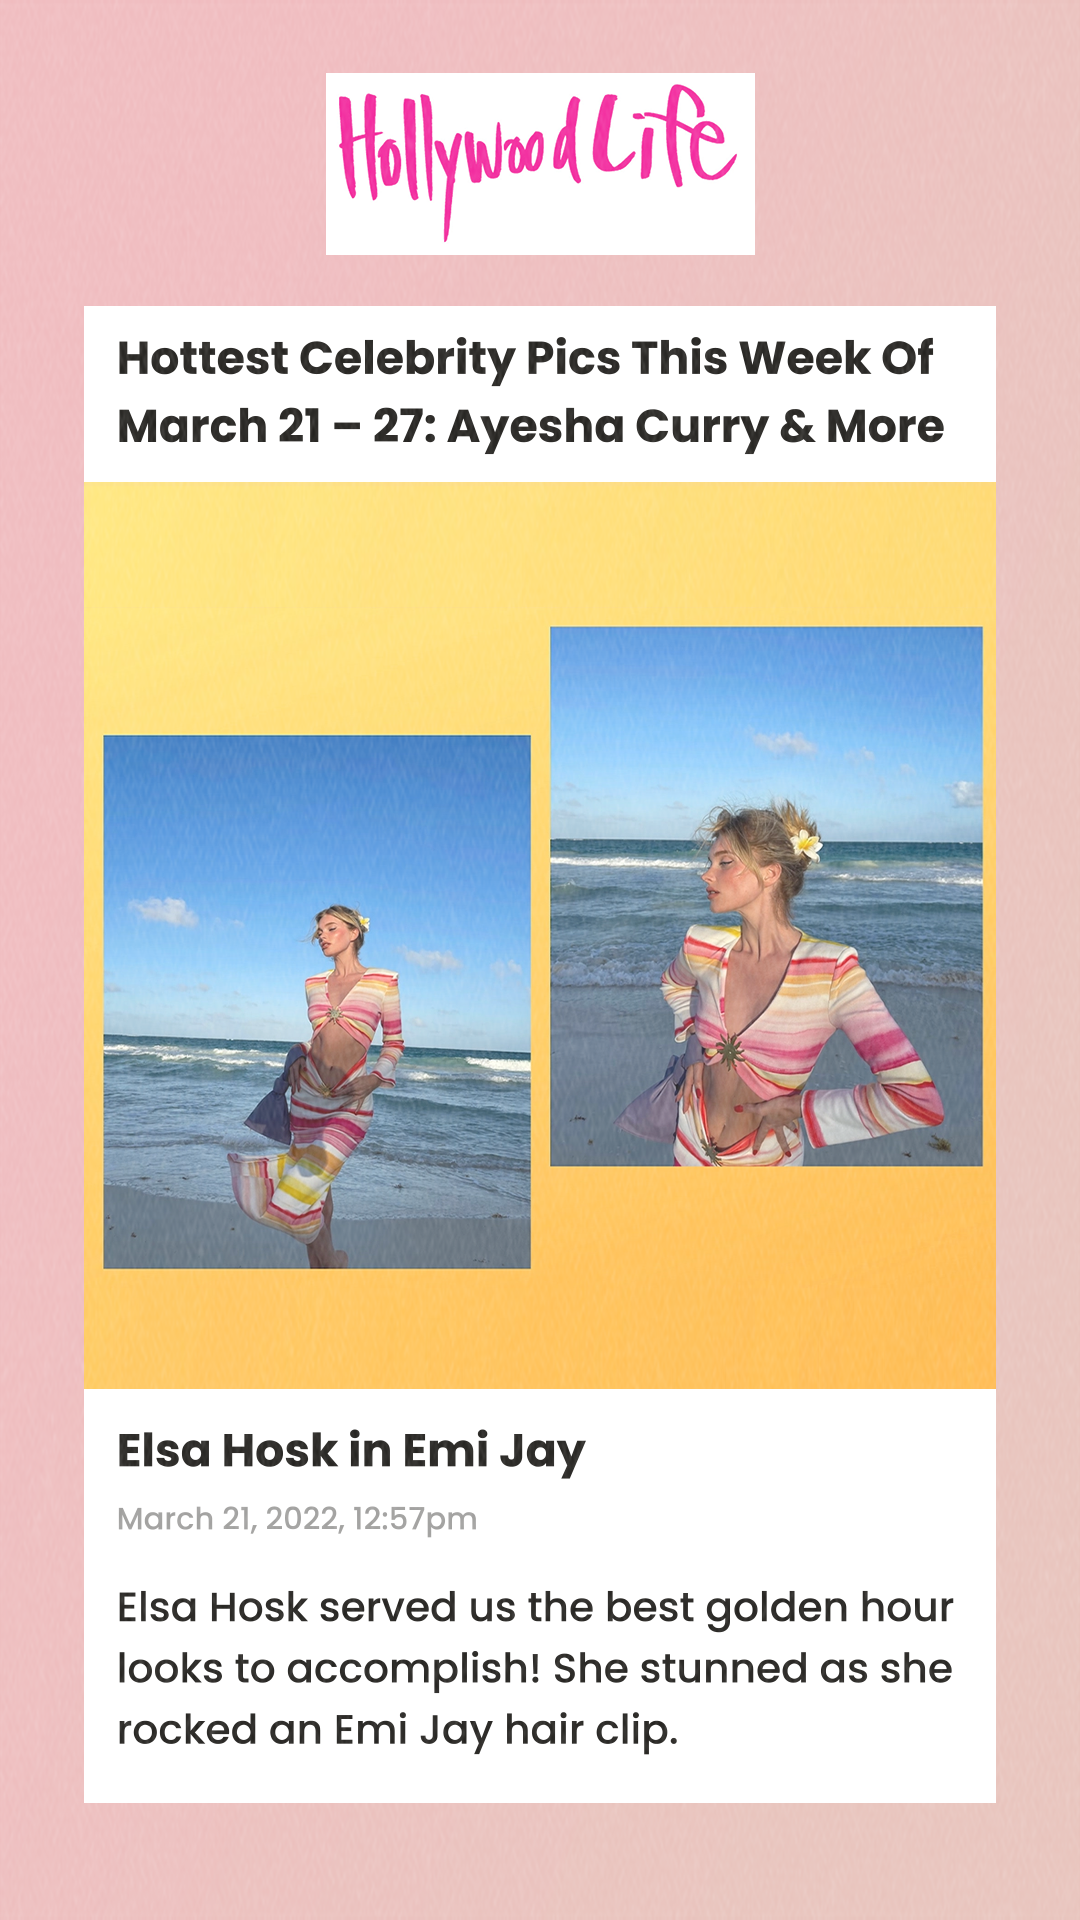 Hottest Celebrity Pics This Week Of March 21 – 27: Ayesha Curry & More Elsa Hosk in Emi Jay March 21, 2022, 12:57pm Elsa Hosk served us the best golden hour looks to accomplish! She stunned as she rocked an Emi Jay hair clip.